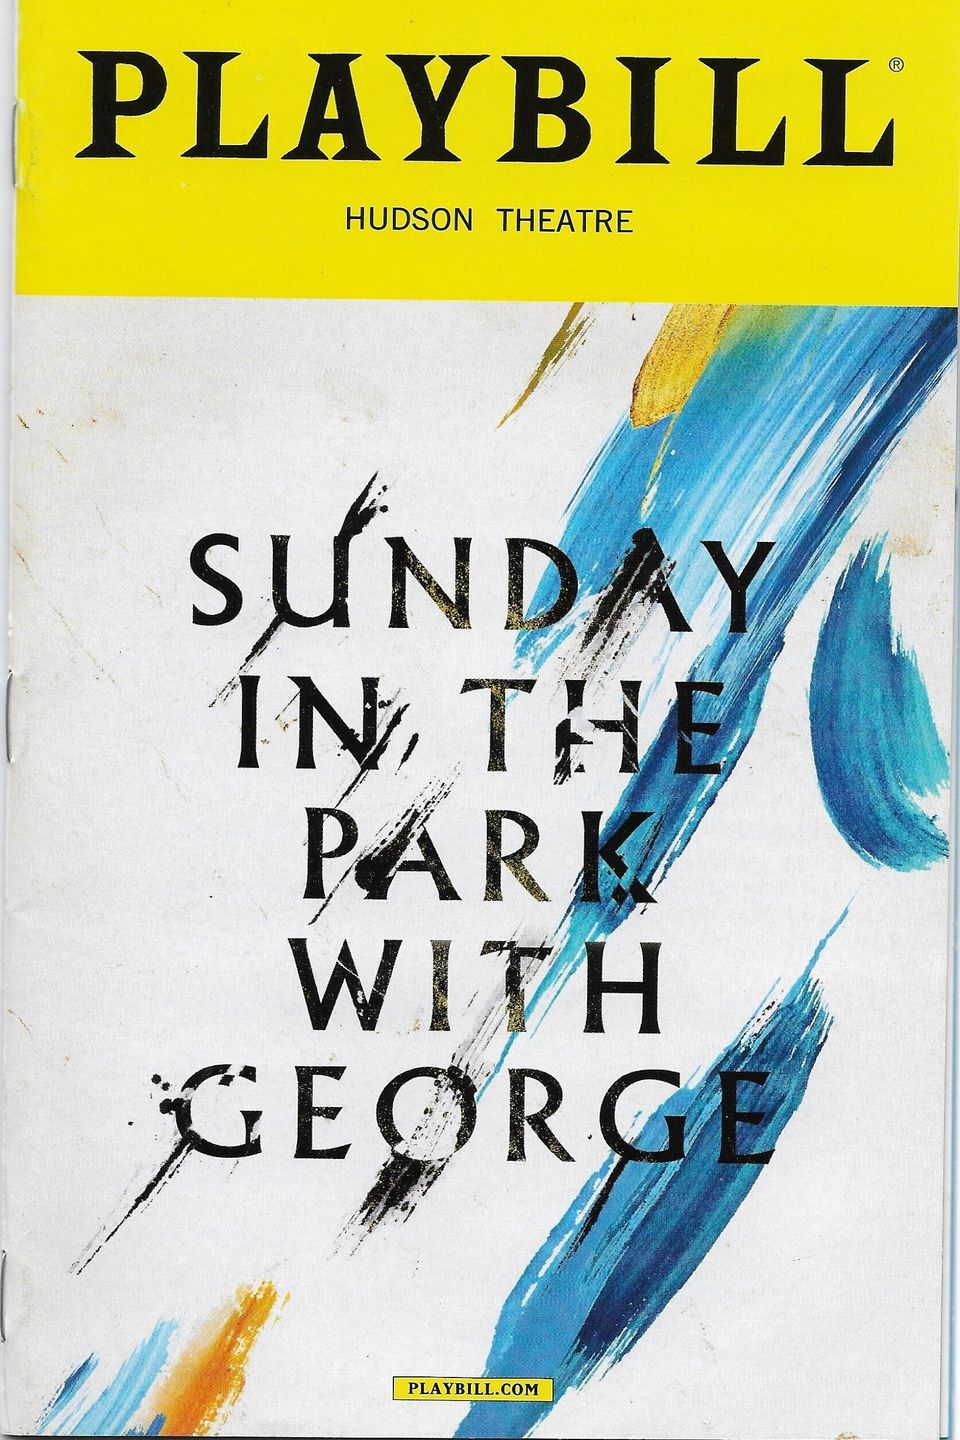 Sunday in the park with george